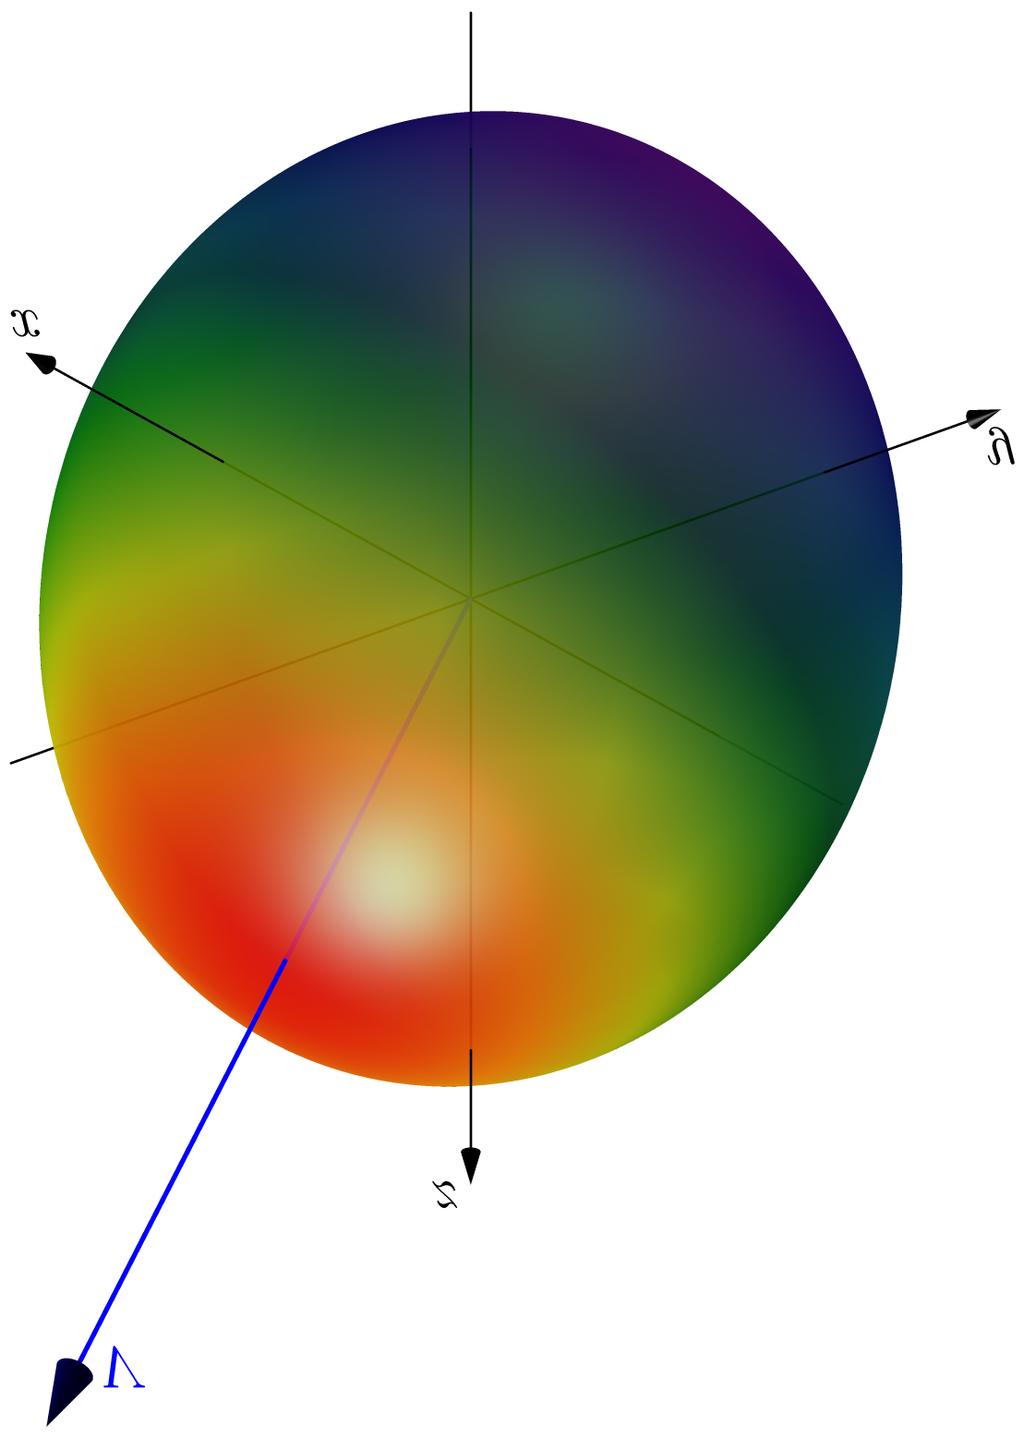 (a) The function f (x, y, z) = V X from Problem 3 for X = (x, y, z) on the unit sphere is depicted by a colour density plot on the sphere. Red represents high values, and blue represents low values.